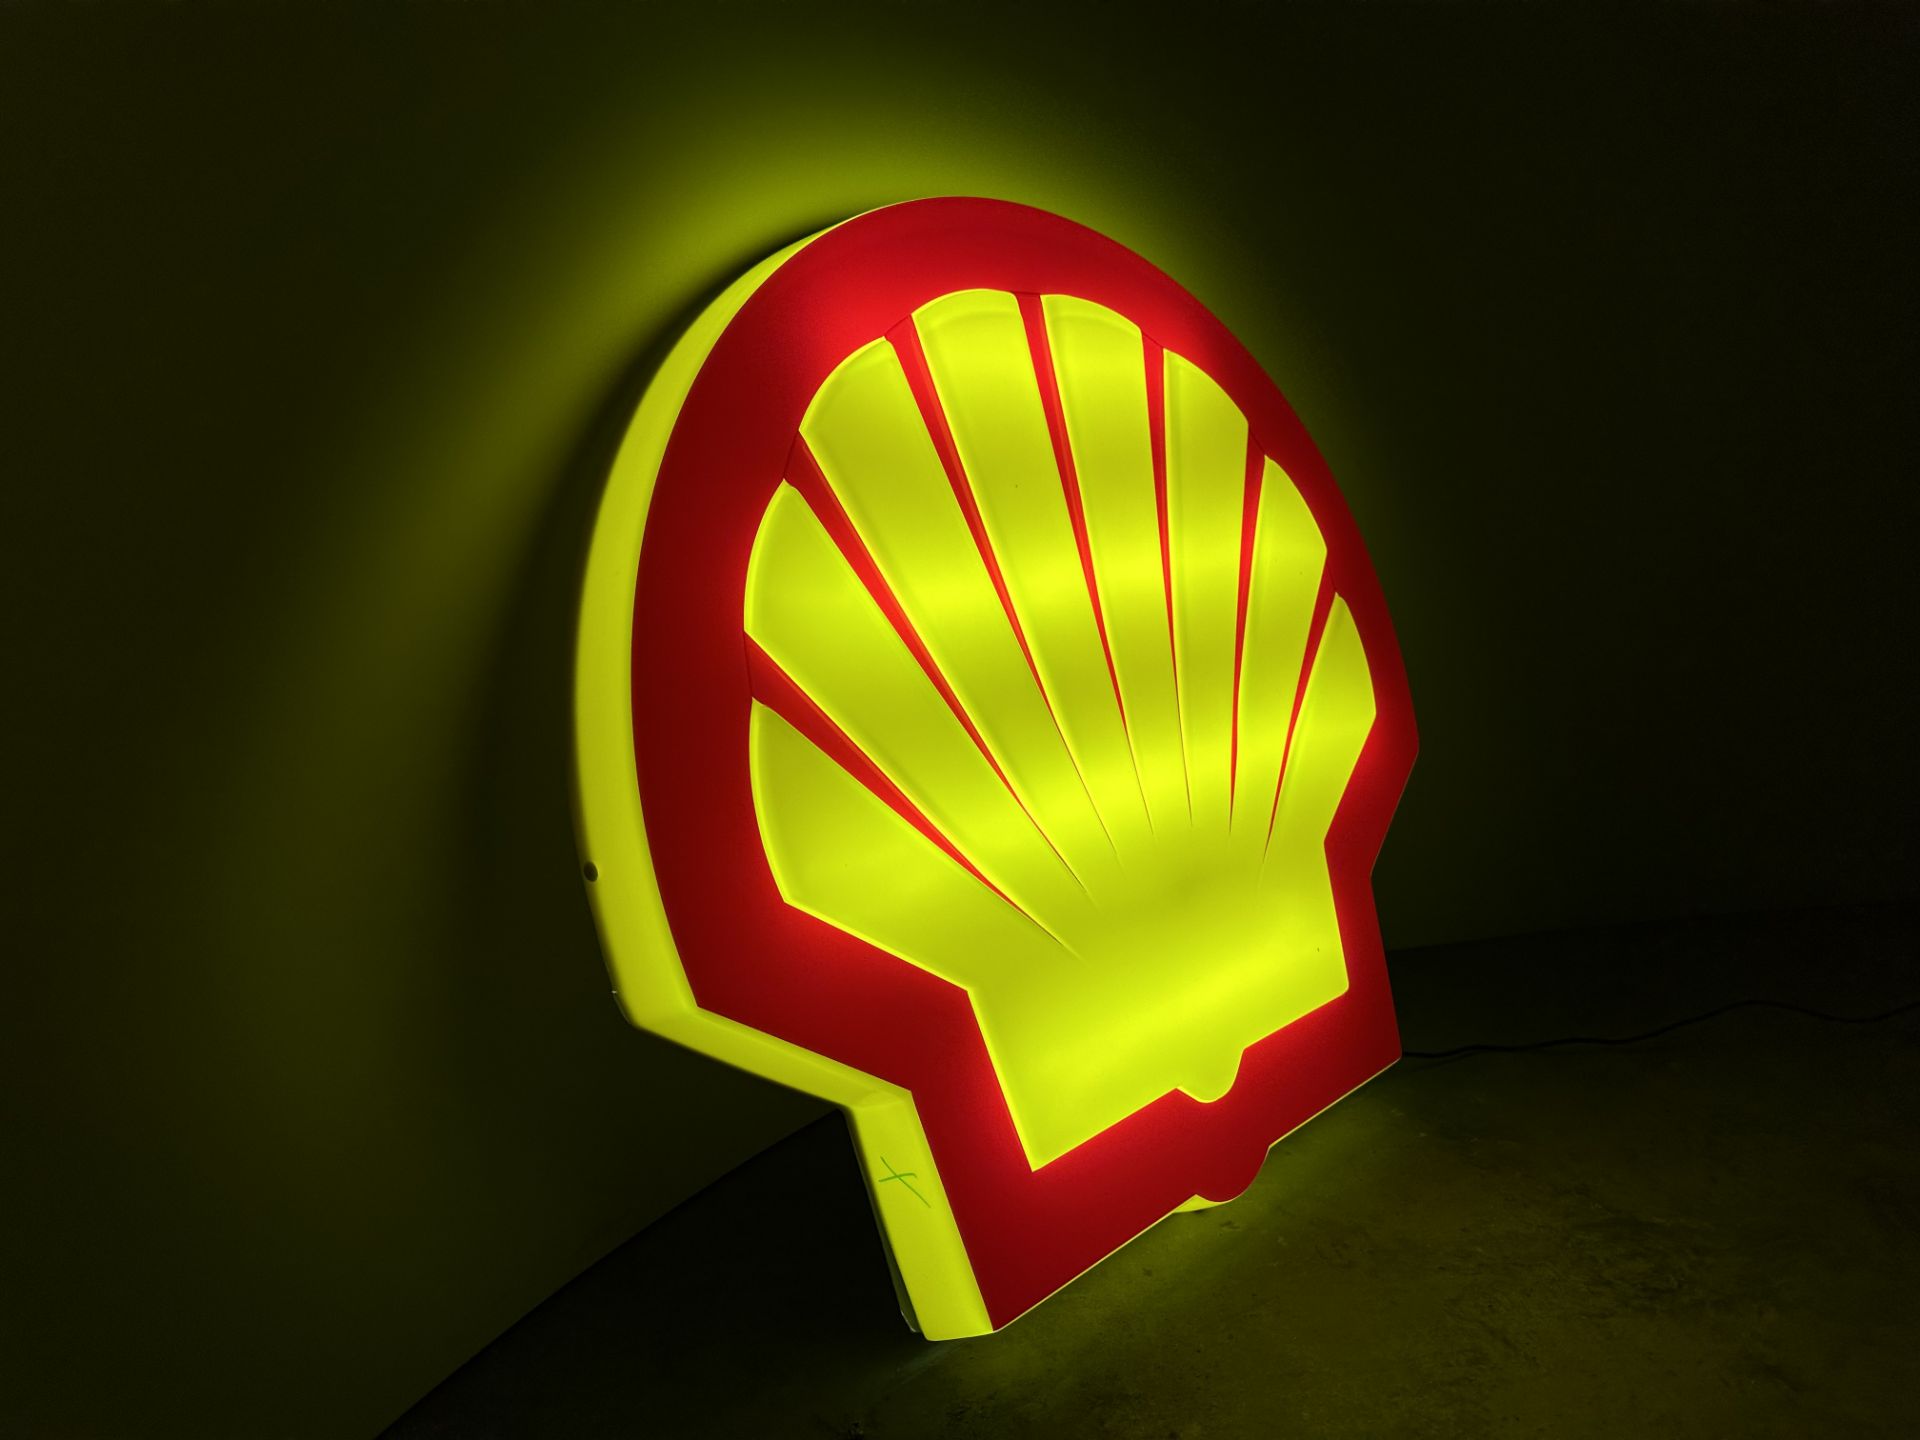 Shell illumination sign works in any country - Image 2 of 5